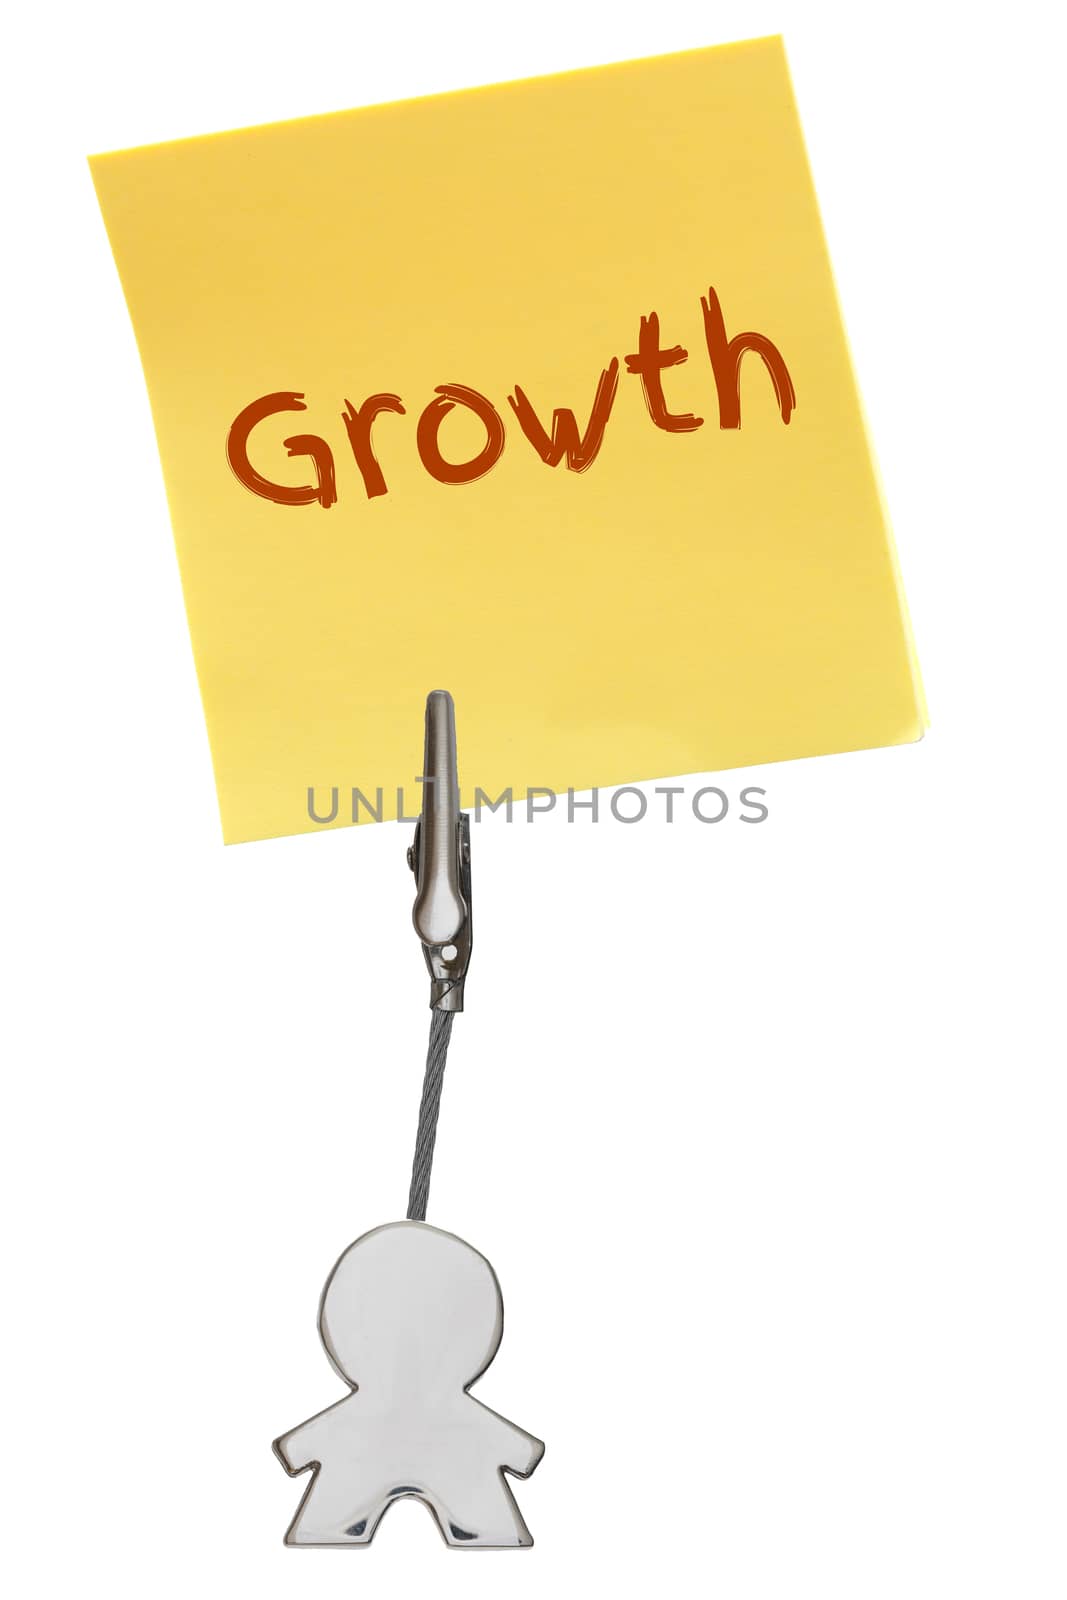 Man Figure Business Card Holder with clip holding a yellow paper note GROWTH; isolated on white background, customizable